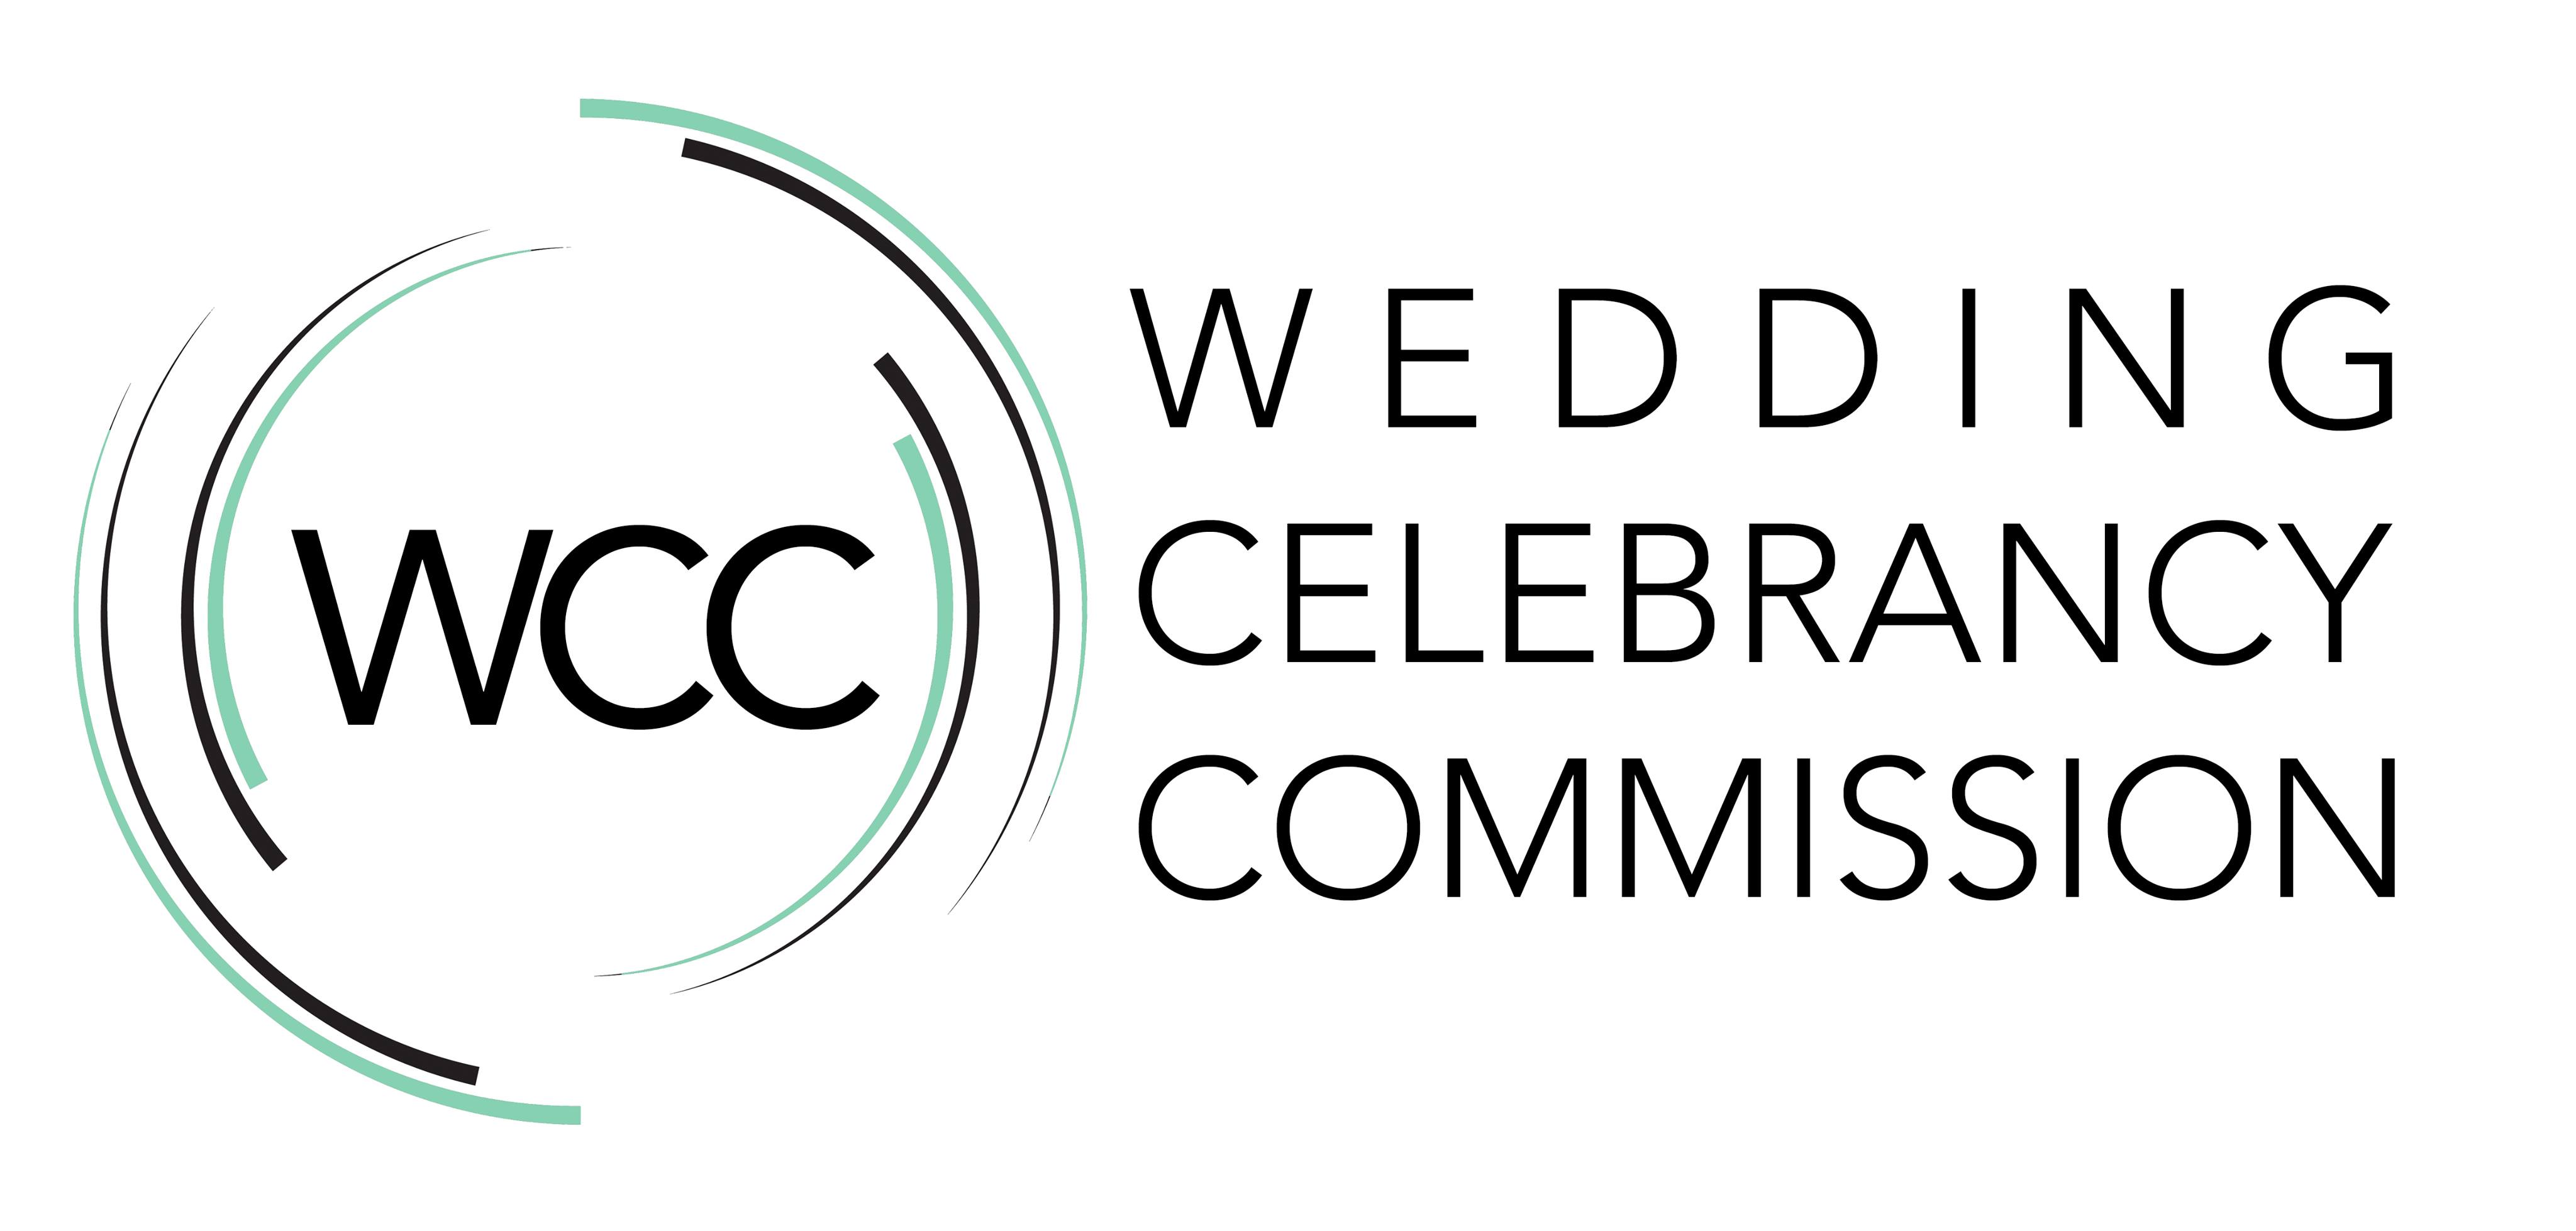 Wedding Celebrancy Commission logo with green and black circles around it.